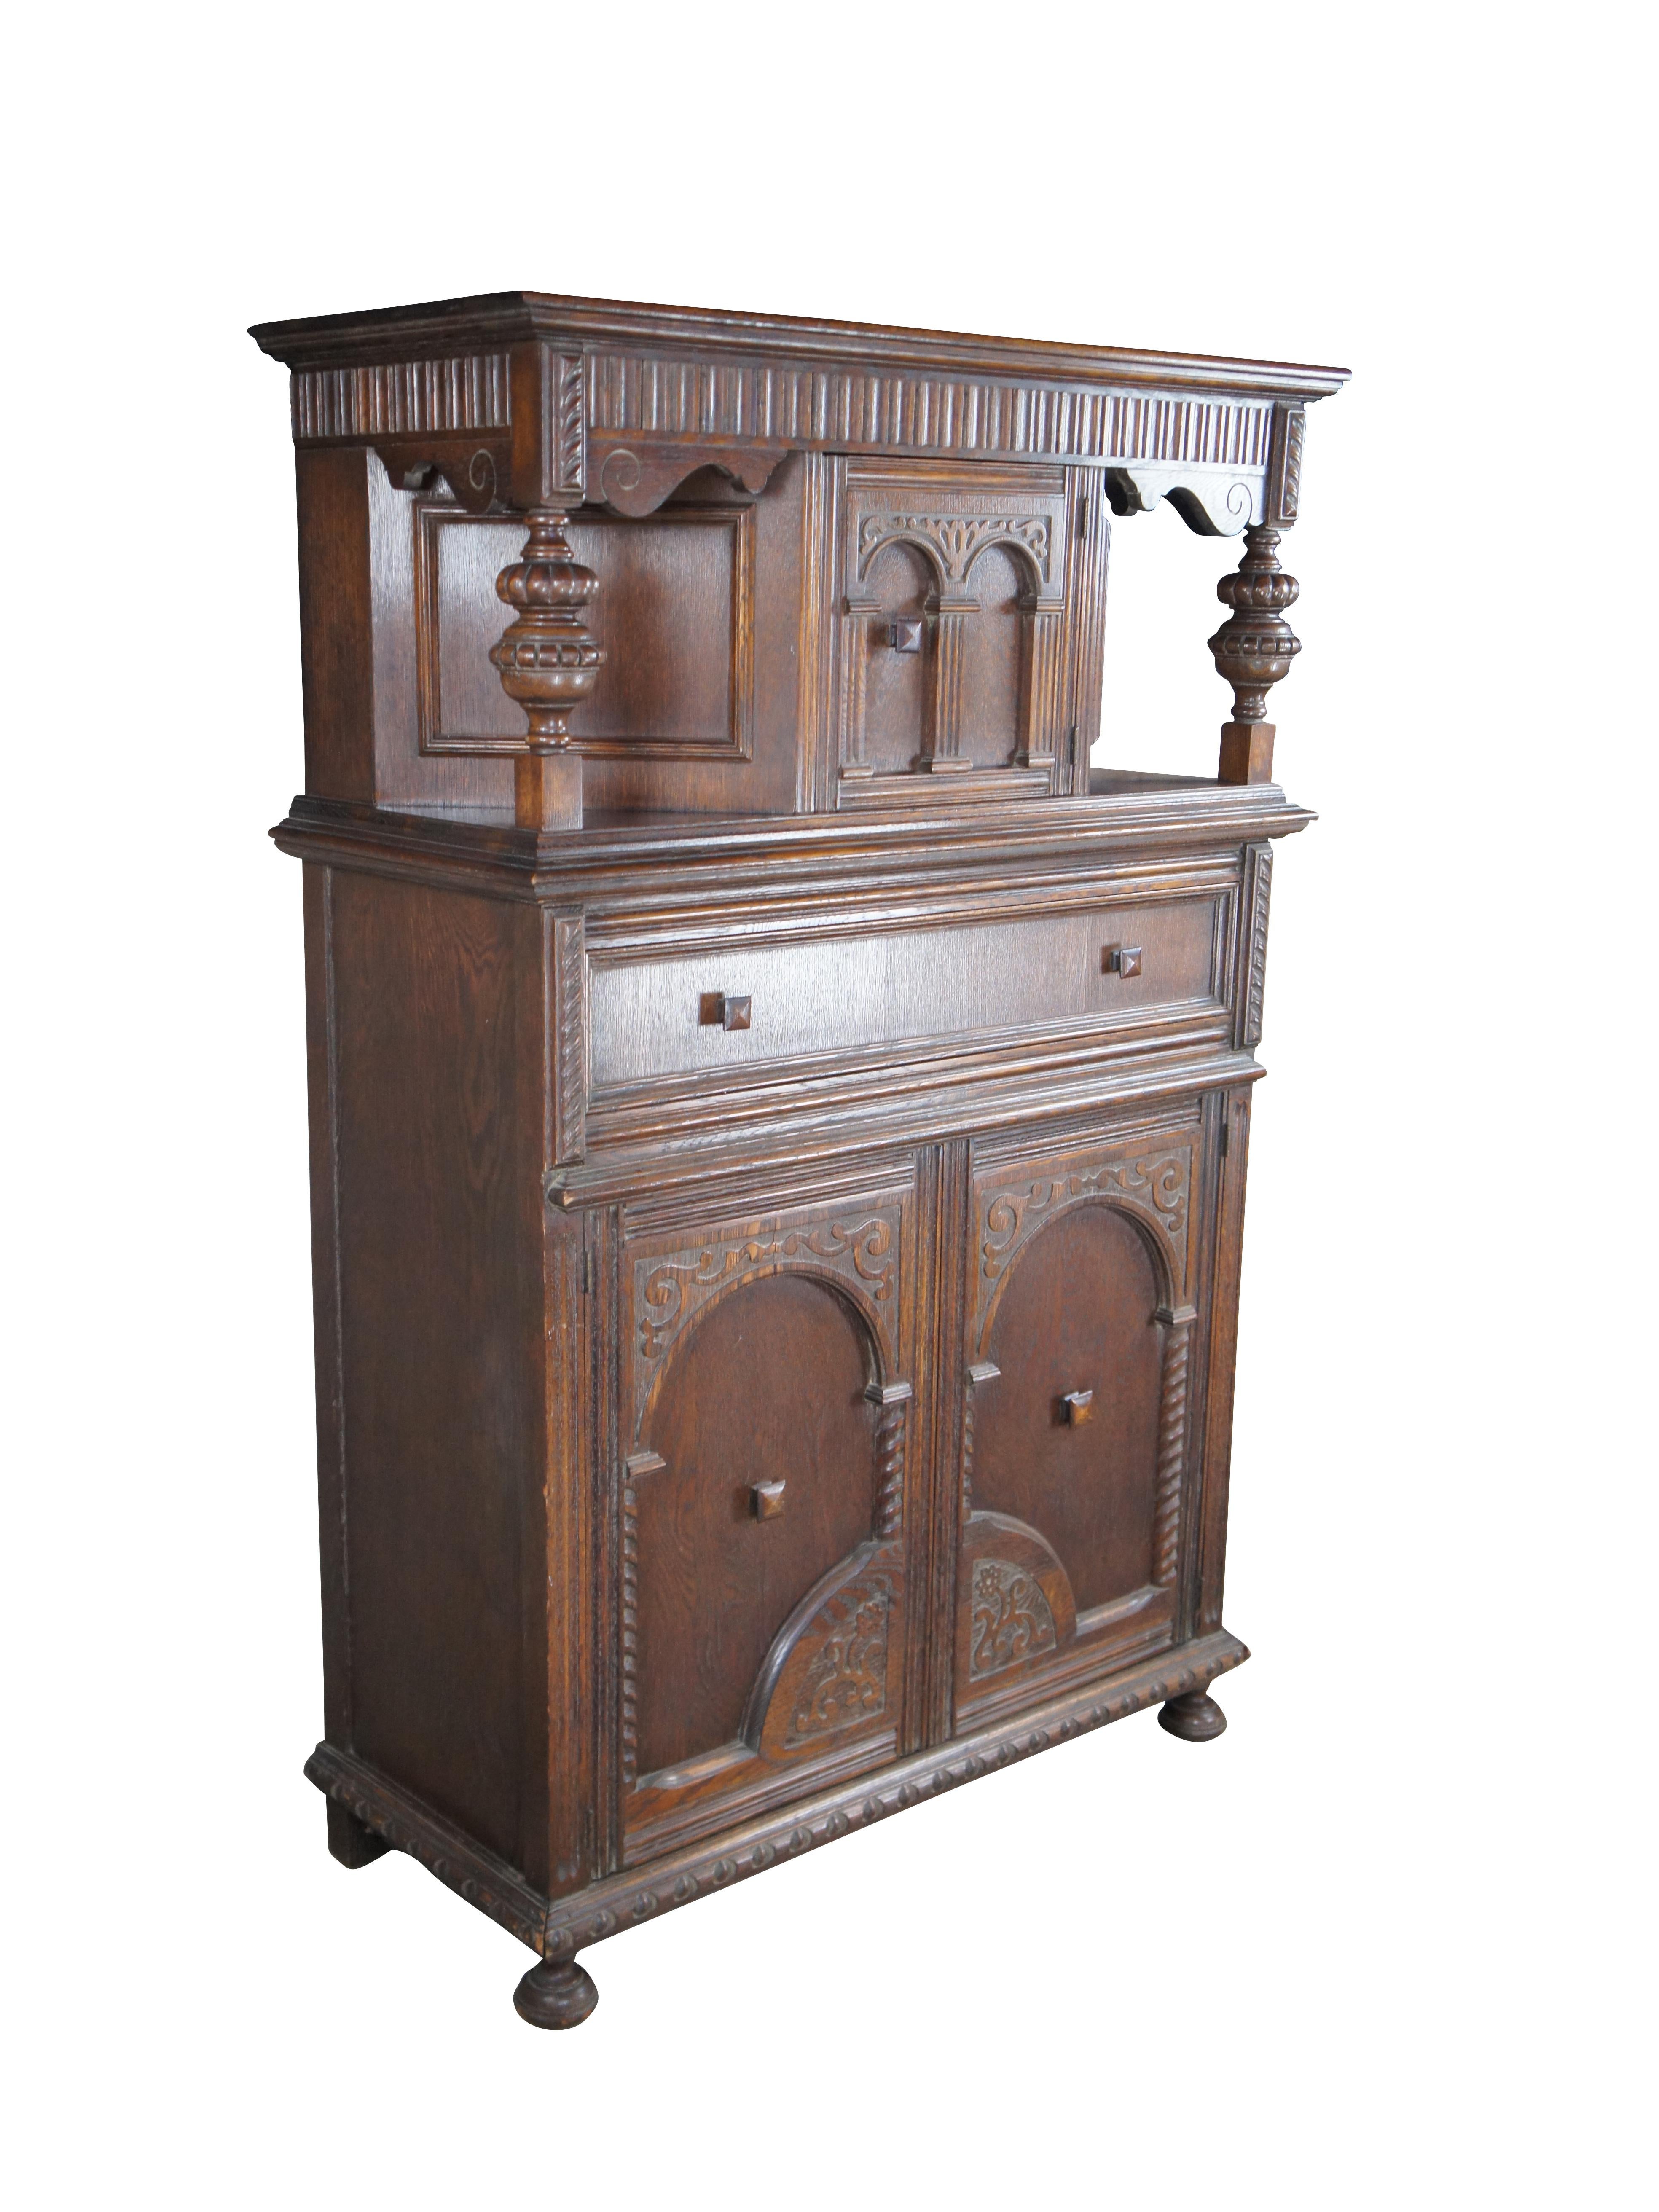 An exceptional Jacobean style Court Cupboard, Circa 1920s. Features a tall case with upper hutch between robust turned baluster supports and scrolled spandrels. Upper apron has fluted paneling in a linen fold manner. Below is a large central